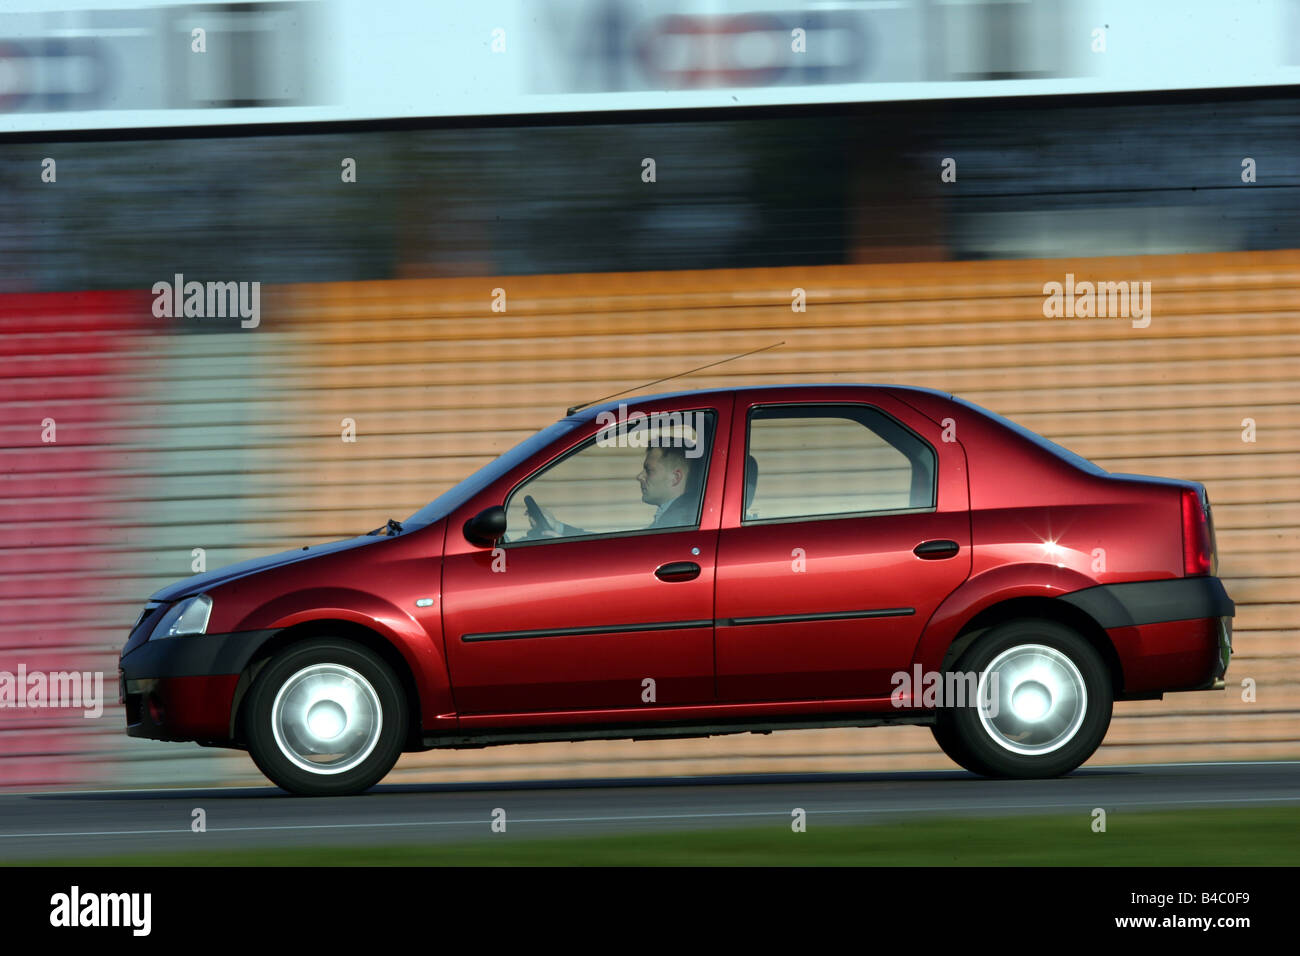 Car, Dacia model year 2004-, Limousine, middle-sized class, red, driving, side view, test track, Achi Stock Photo - Alamy